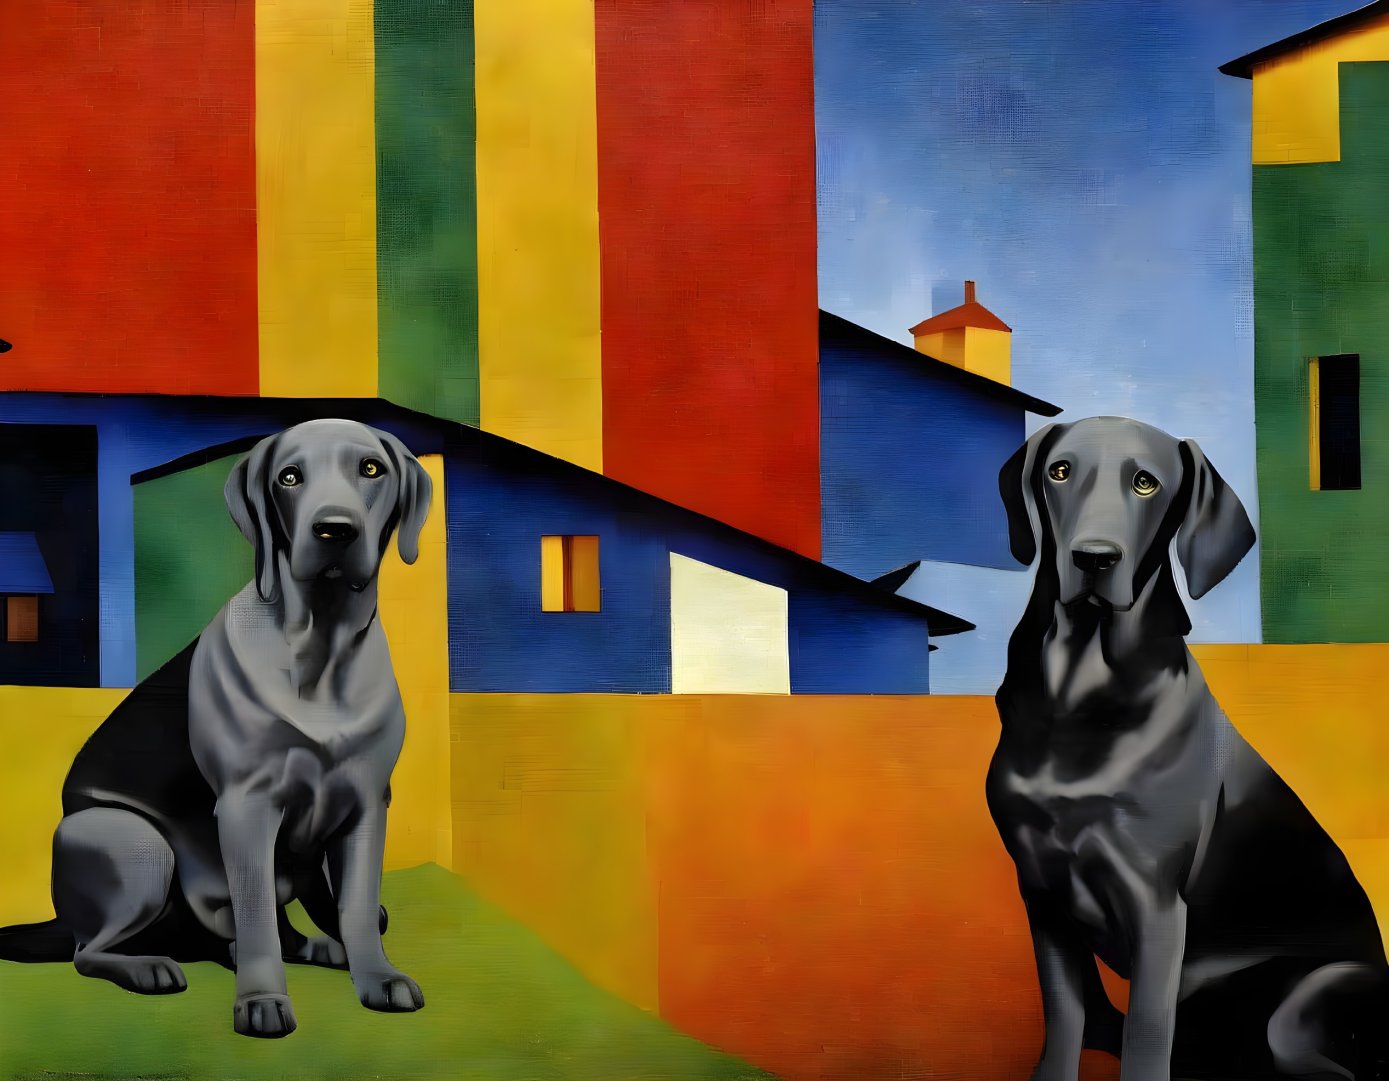 Black Dogs Against Colorful Abstract Geometric Background